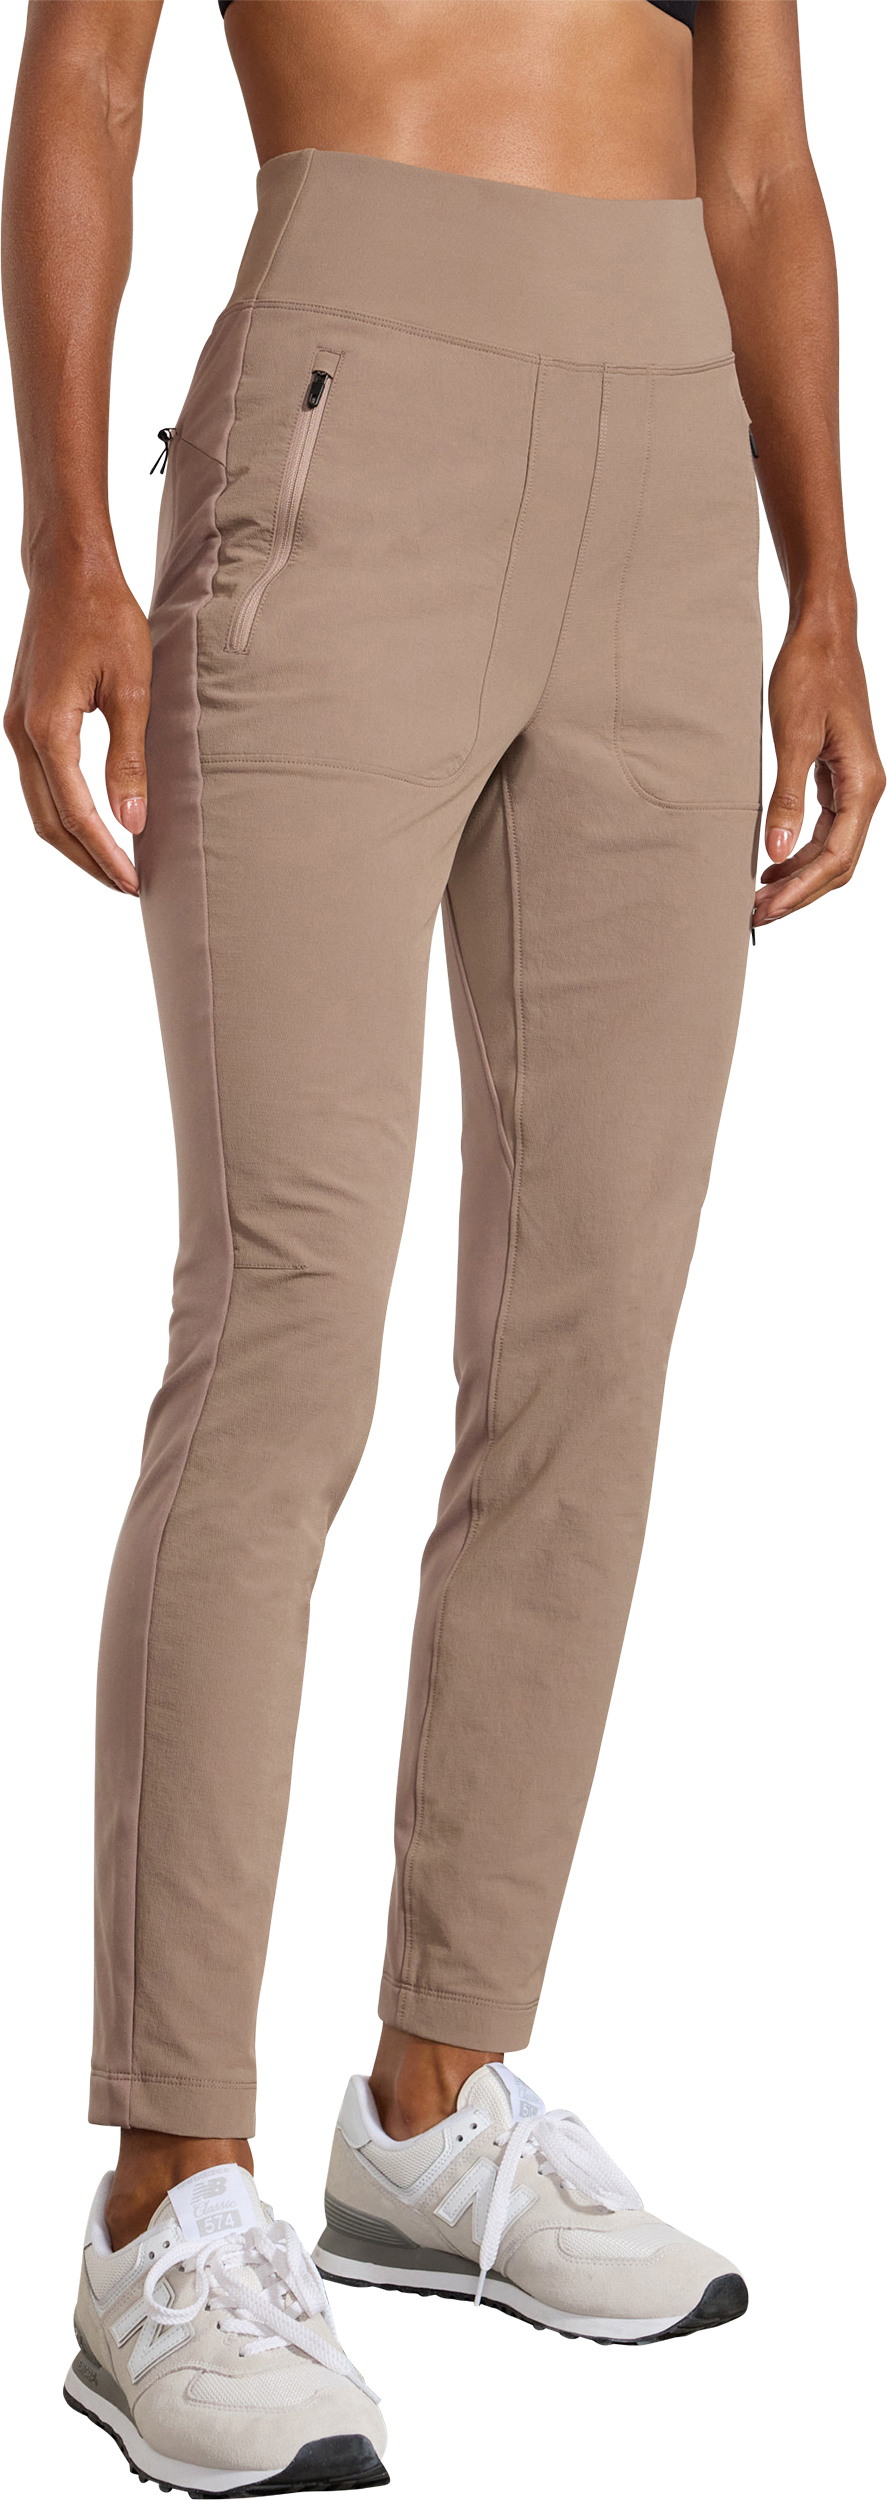 MPG Journey Cold Weather Hybrid Pant - Women's